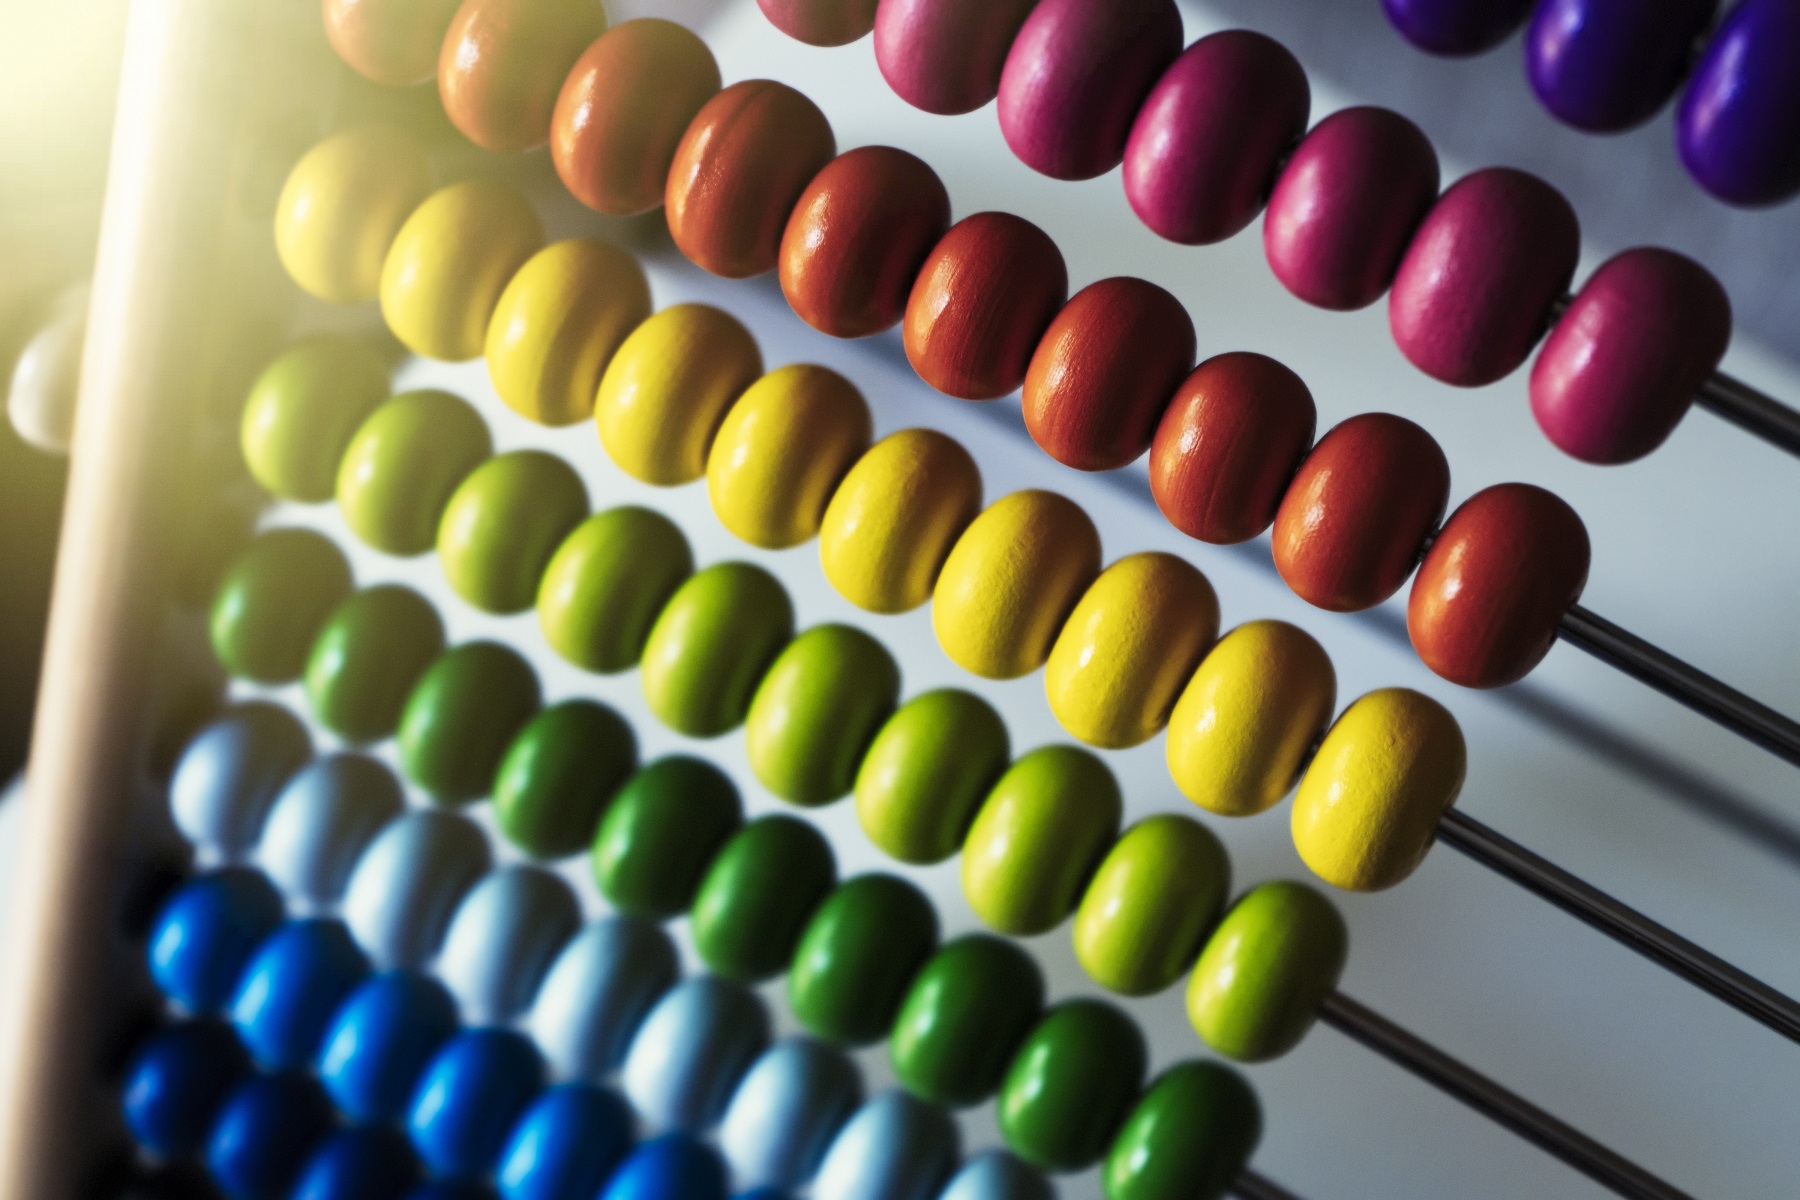 Abacus with colorful beads closeup. Lens flare